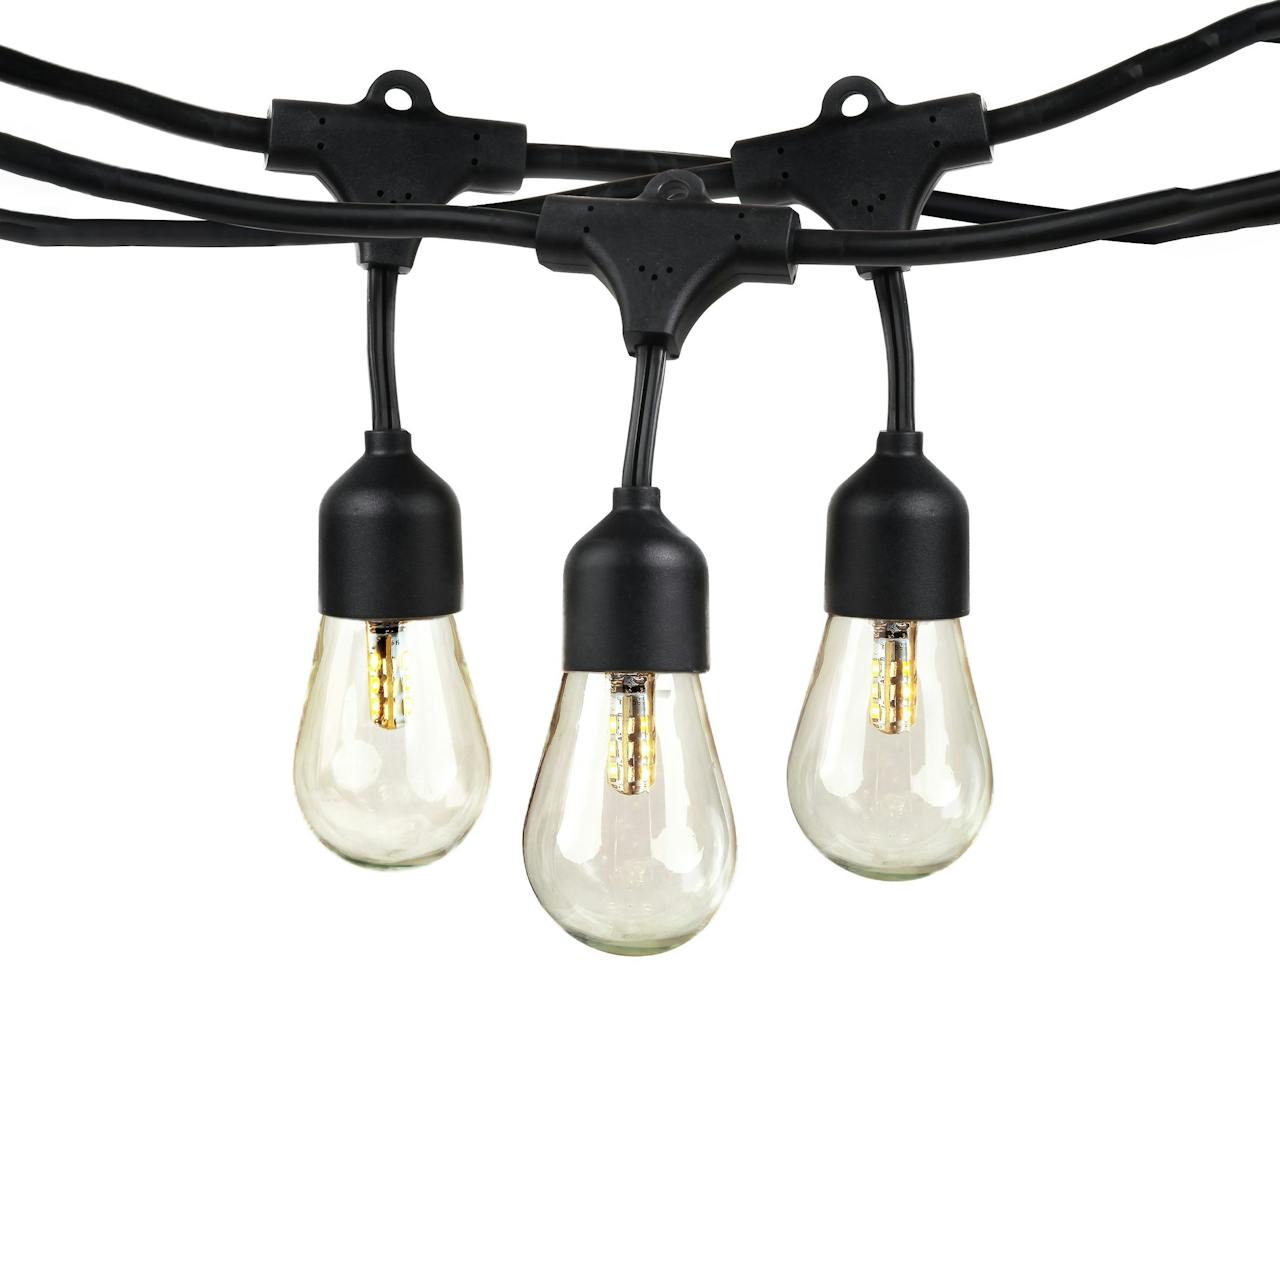 Brightech Ambience Pro Solar - Hanging String Lights